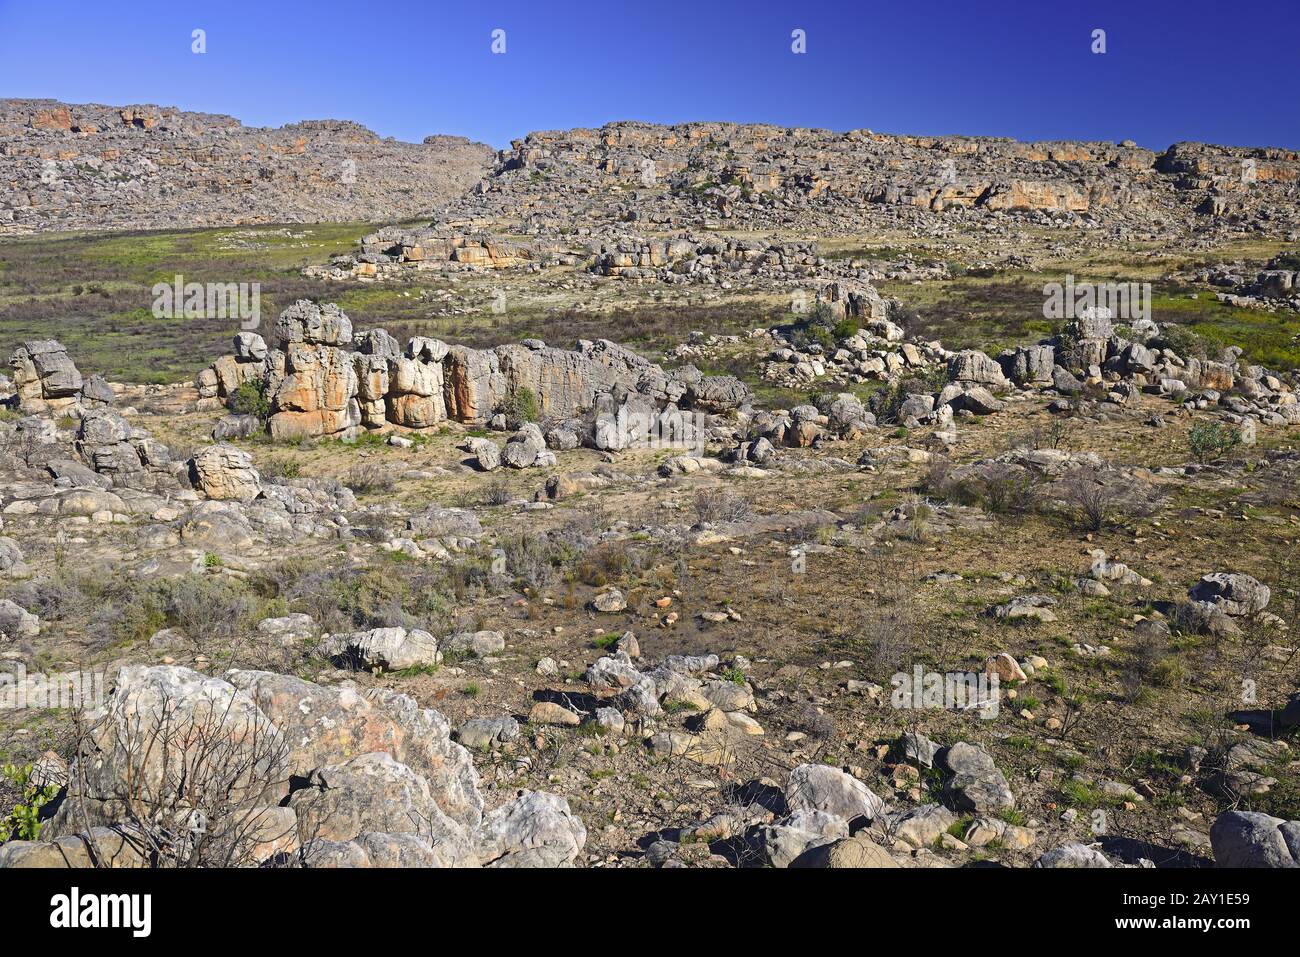 View in the landscape of the Cederberg Wilderness Area near Clanwi Stock Photo